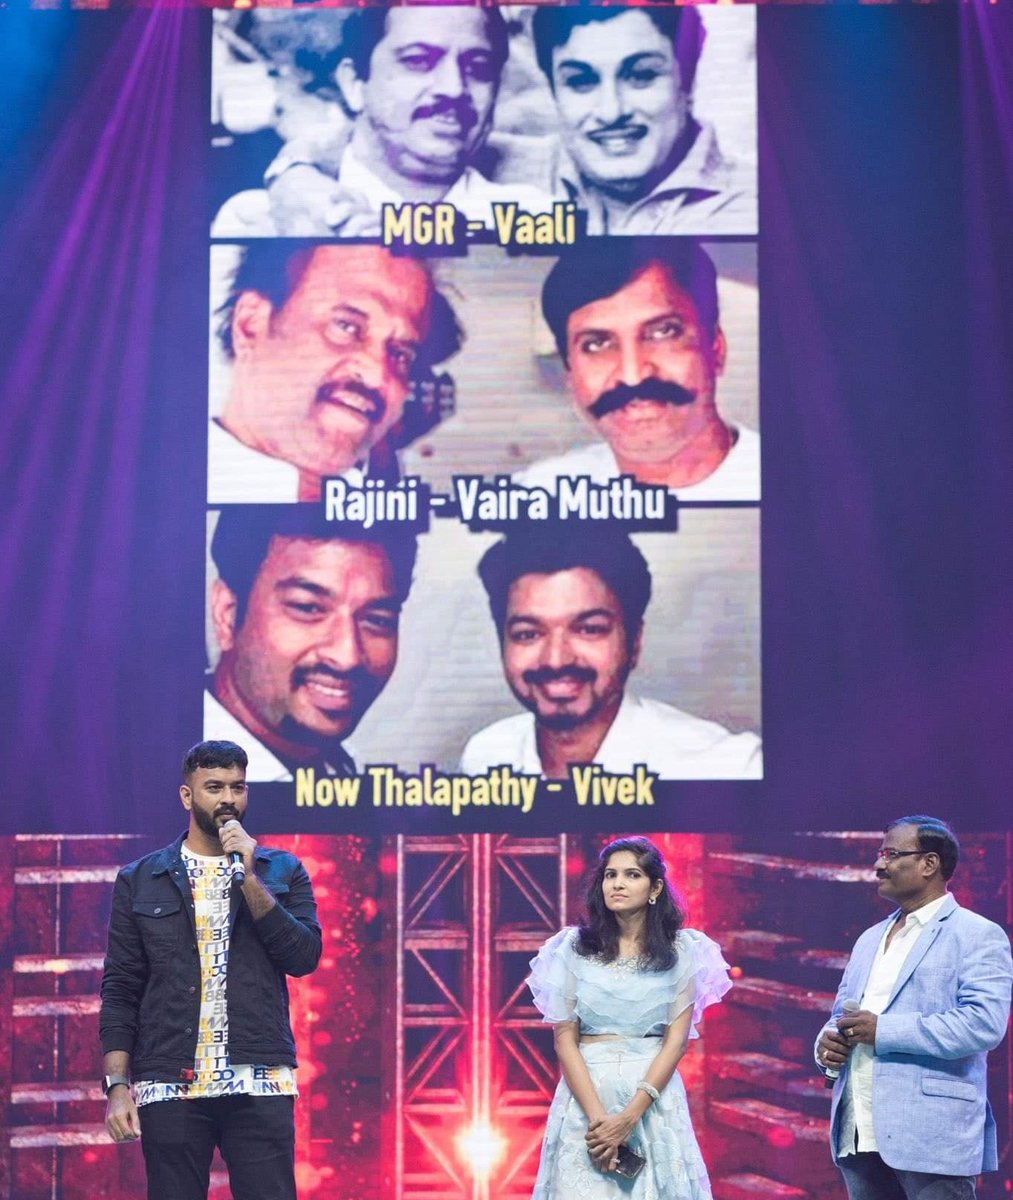 Here is the Exclusive Pictures of  #Bigil team!! 
From #BigilAudioLaunch 

The Light & Love From The Fans Says Everything #BigilOfficial ❤

#Thalapathy #Vijay #AtleeDirector #Nayanthara #ARrahman #AgsProduction #ArchanaKalpathi #ActorVivek #Kathir 

#BigilAudioLaunchOnSunTV